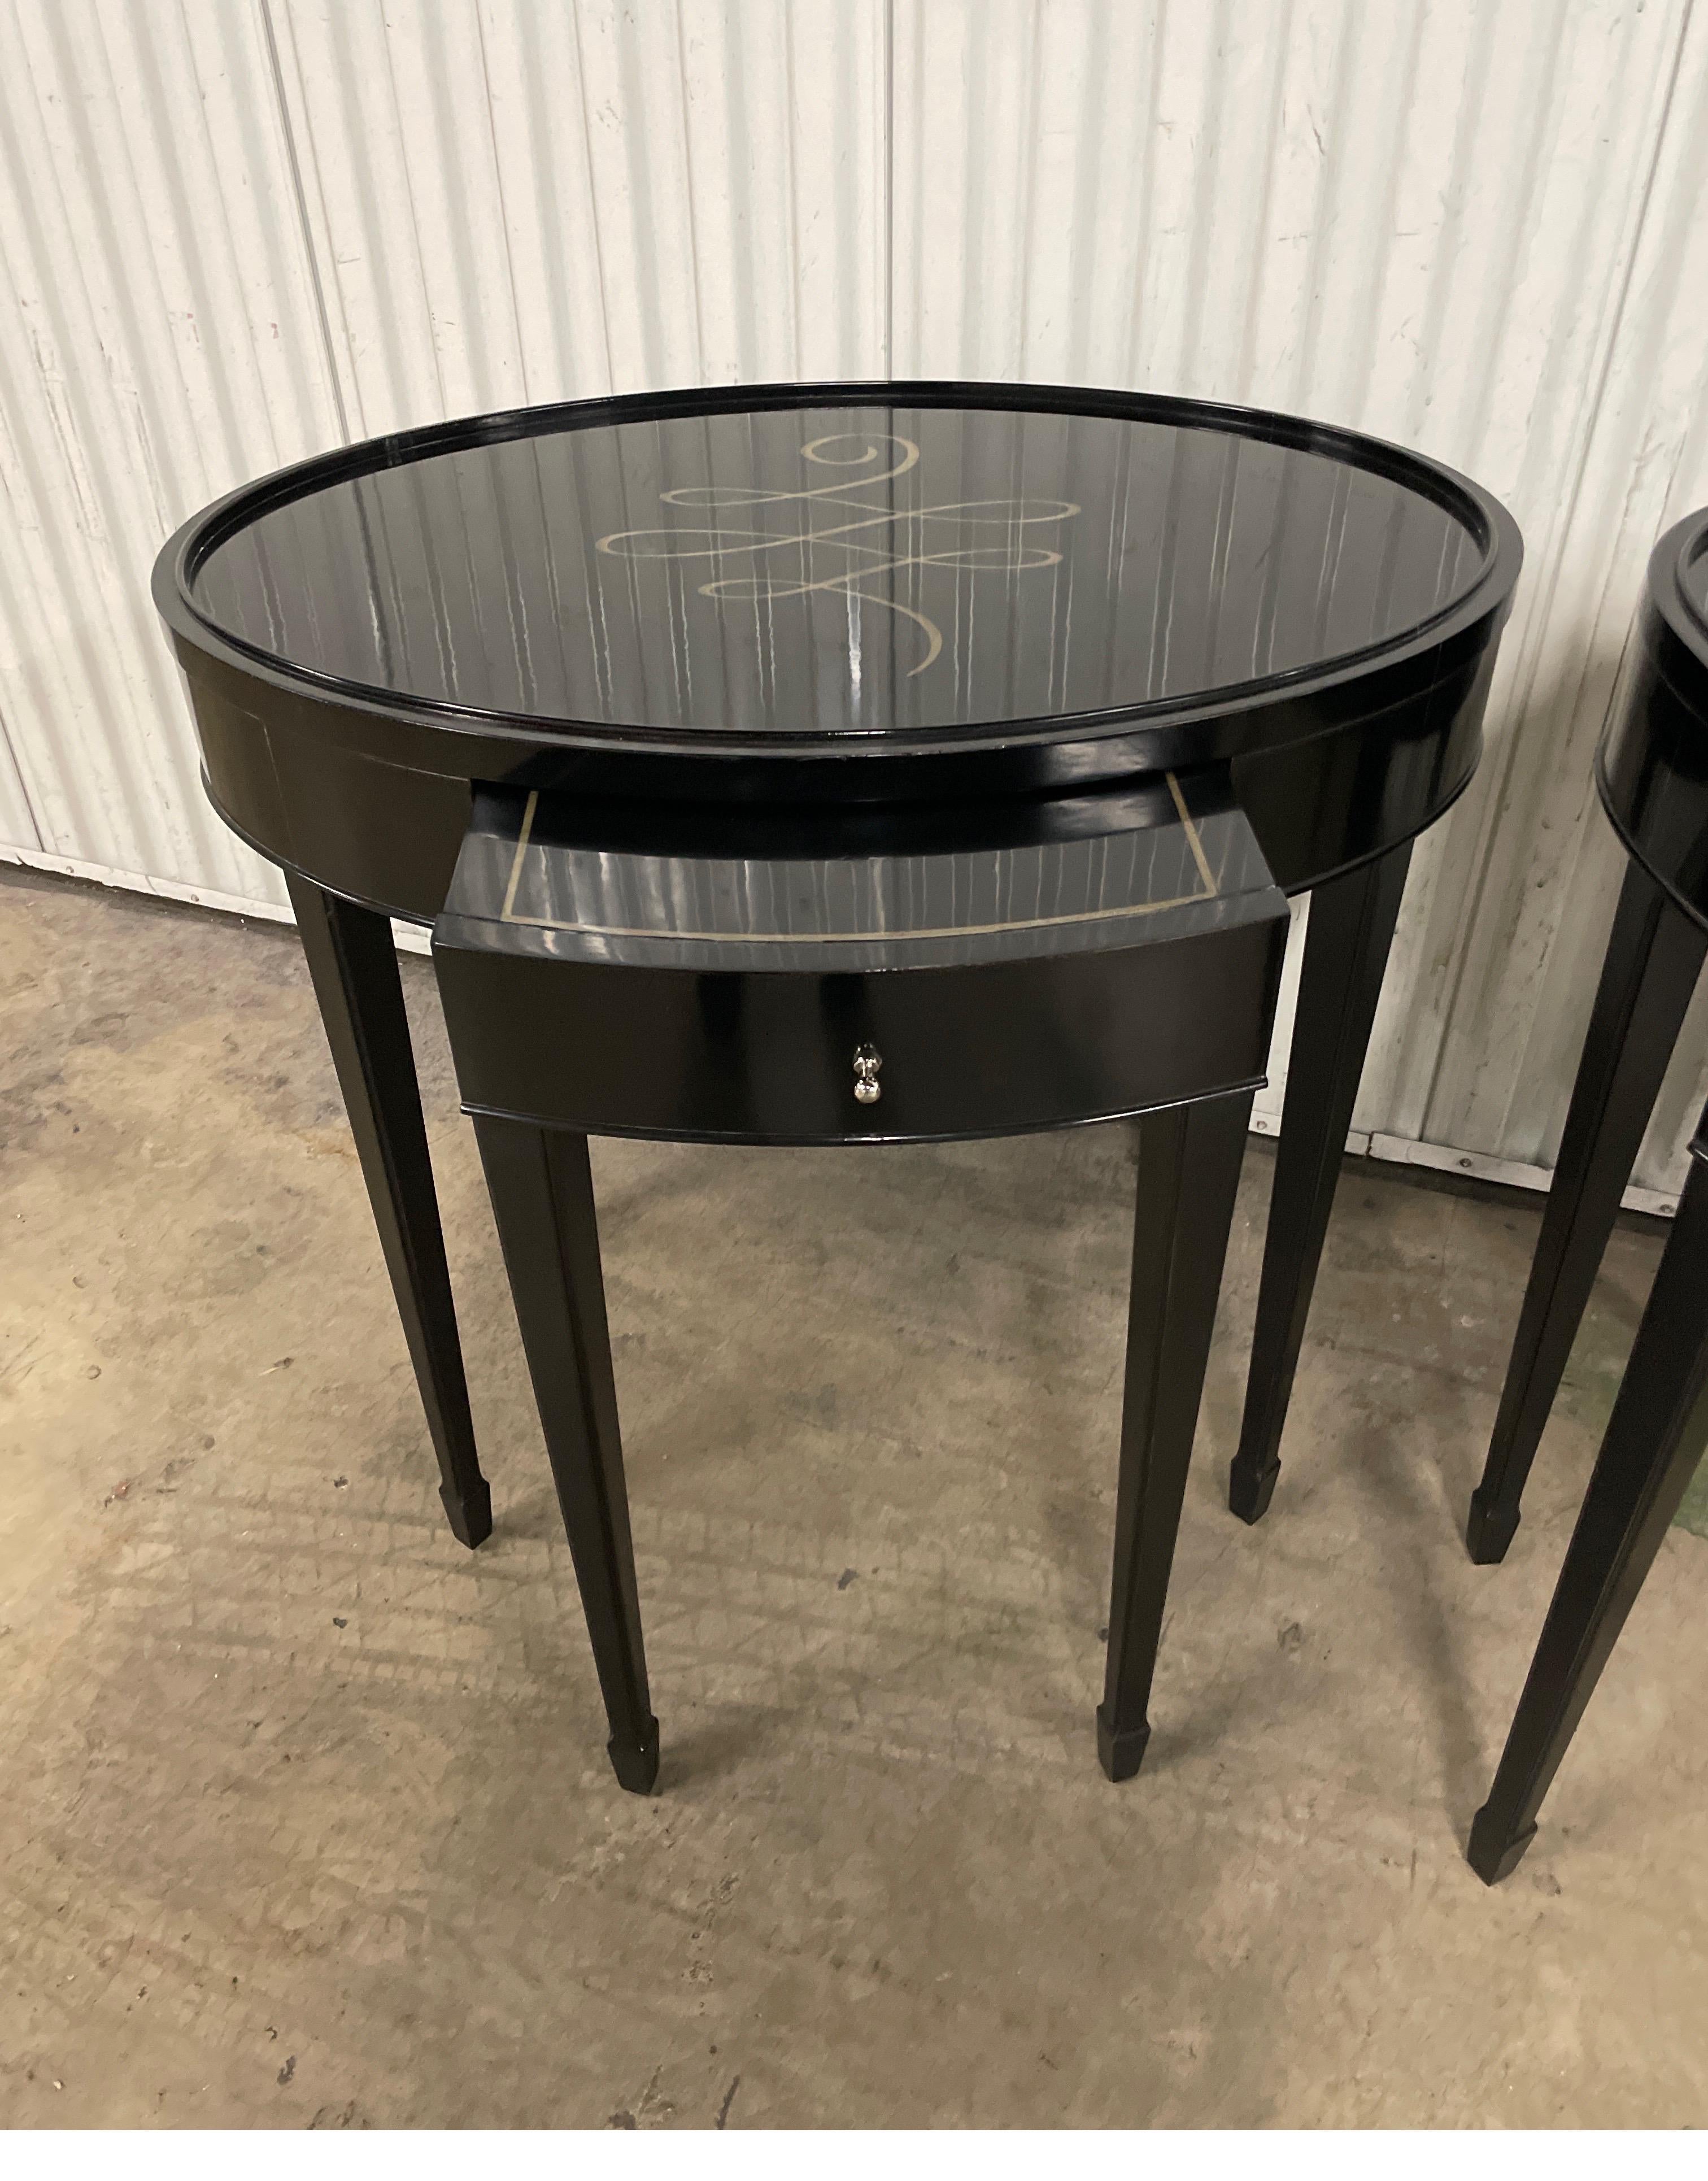 Neoclassical Pair of Black Lacquered Oval End Tables by Barbara Barry for Baker